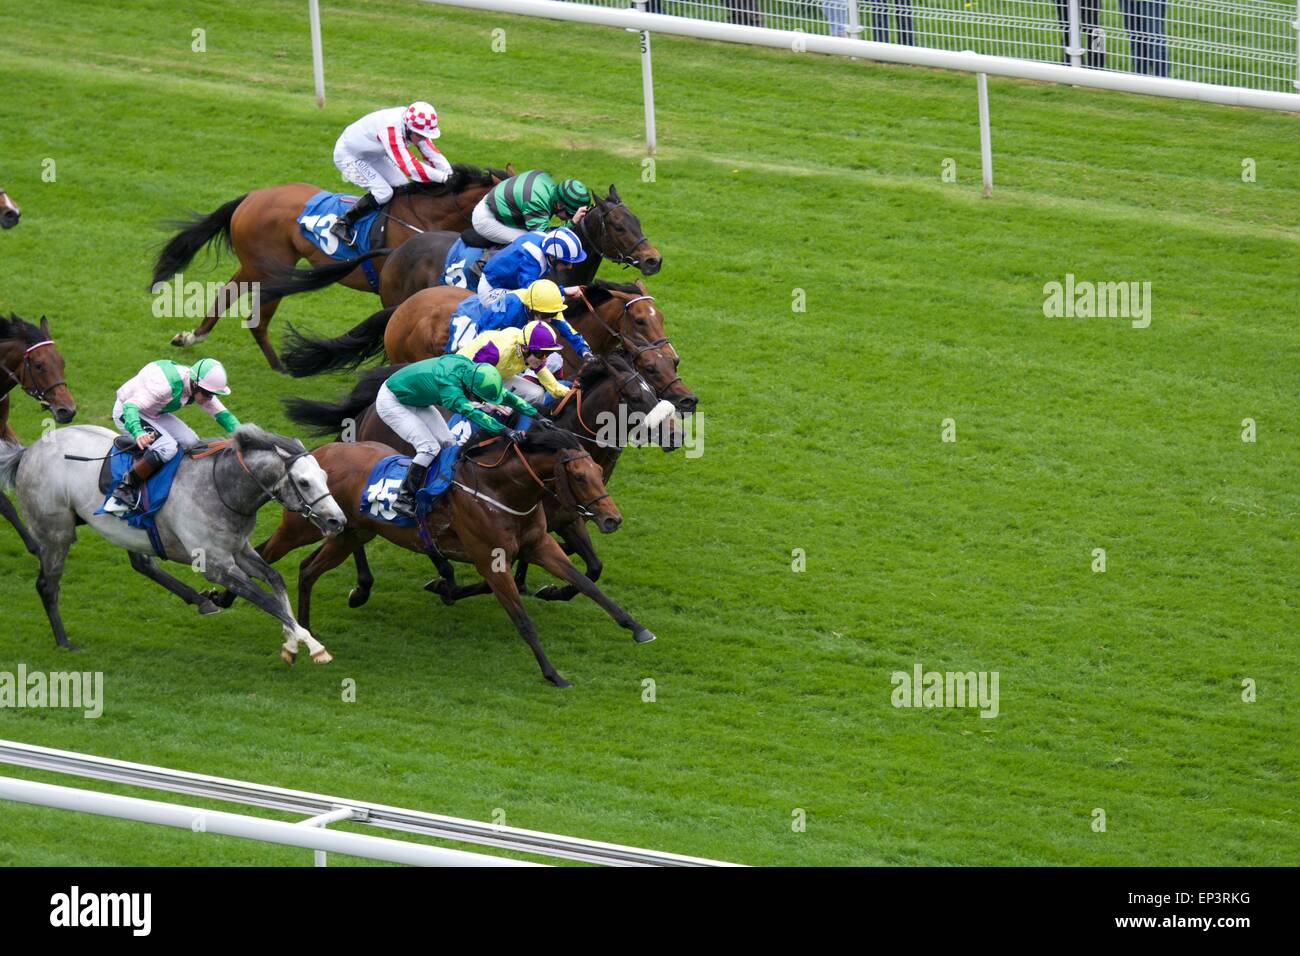 York, UK. 13th May, 2015. Glass Office (number 4) , the grey nearest to the fence, ridden by Jim Crowley forces its way to  win the third race of the day - The Duke of York Clipper Logistics Stakes - at the Dante Festival at York. Horse-racing at York  UK Credit:  John Fryer/Alamy Live News Stock Photo